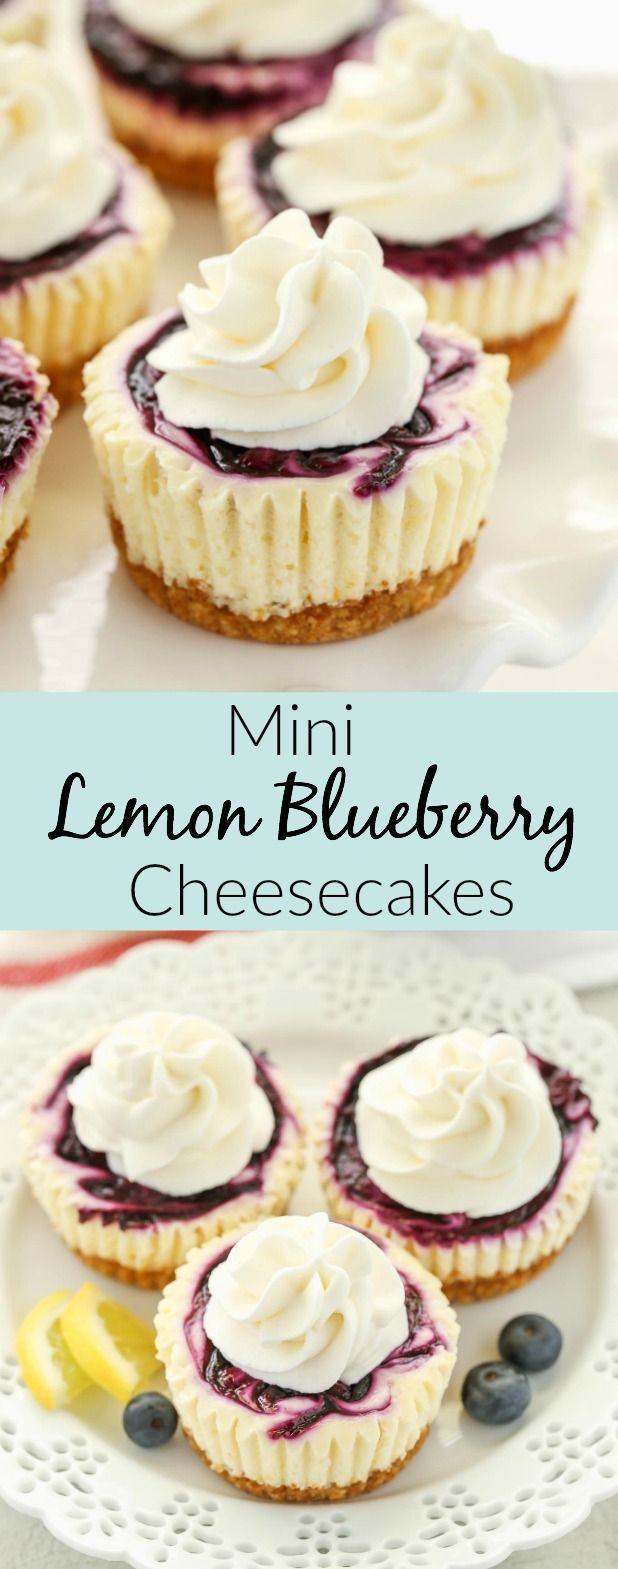 These Mini Lemon Blueberry Cheesecakes feature an easy homemade graham cracker crust, smooth and creamy lemon cheesecake filling, and a simple blueberry swirl! -   23 lemon cheesecake recipes ideas